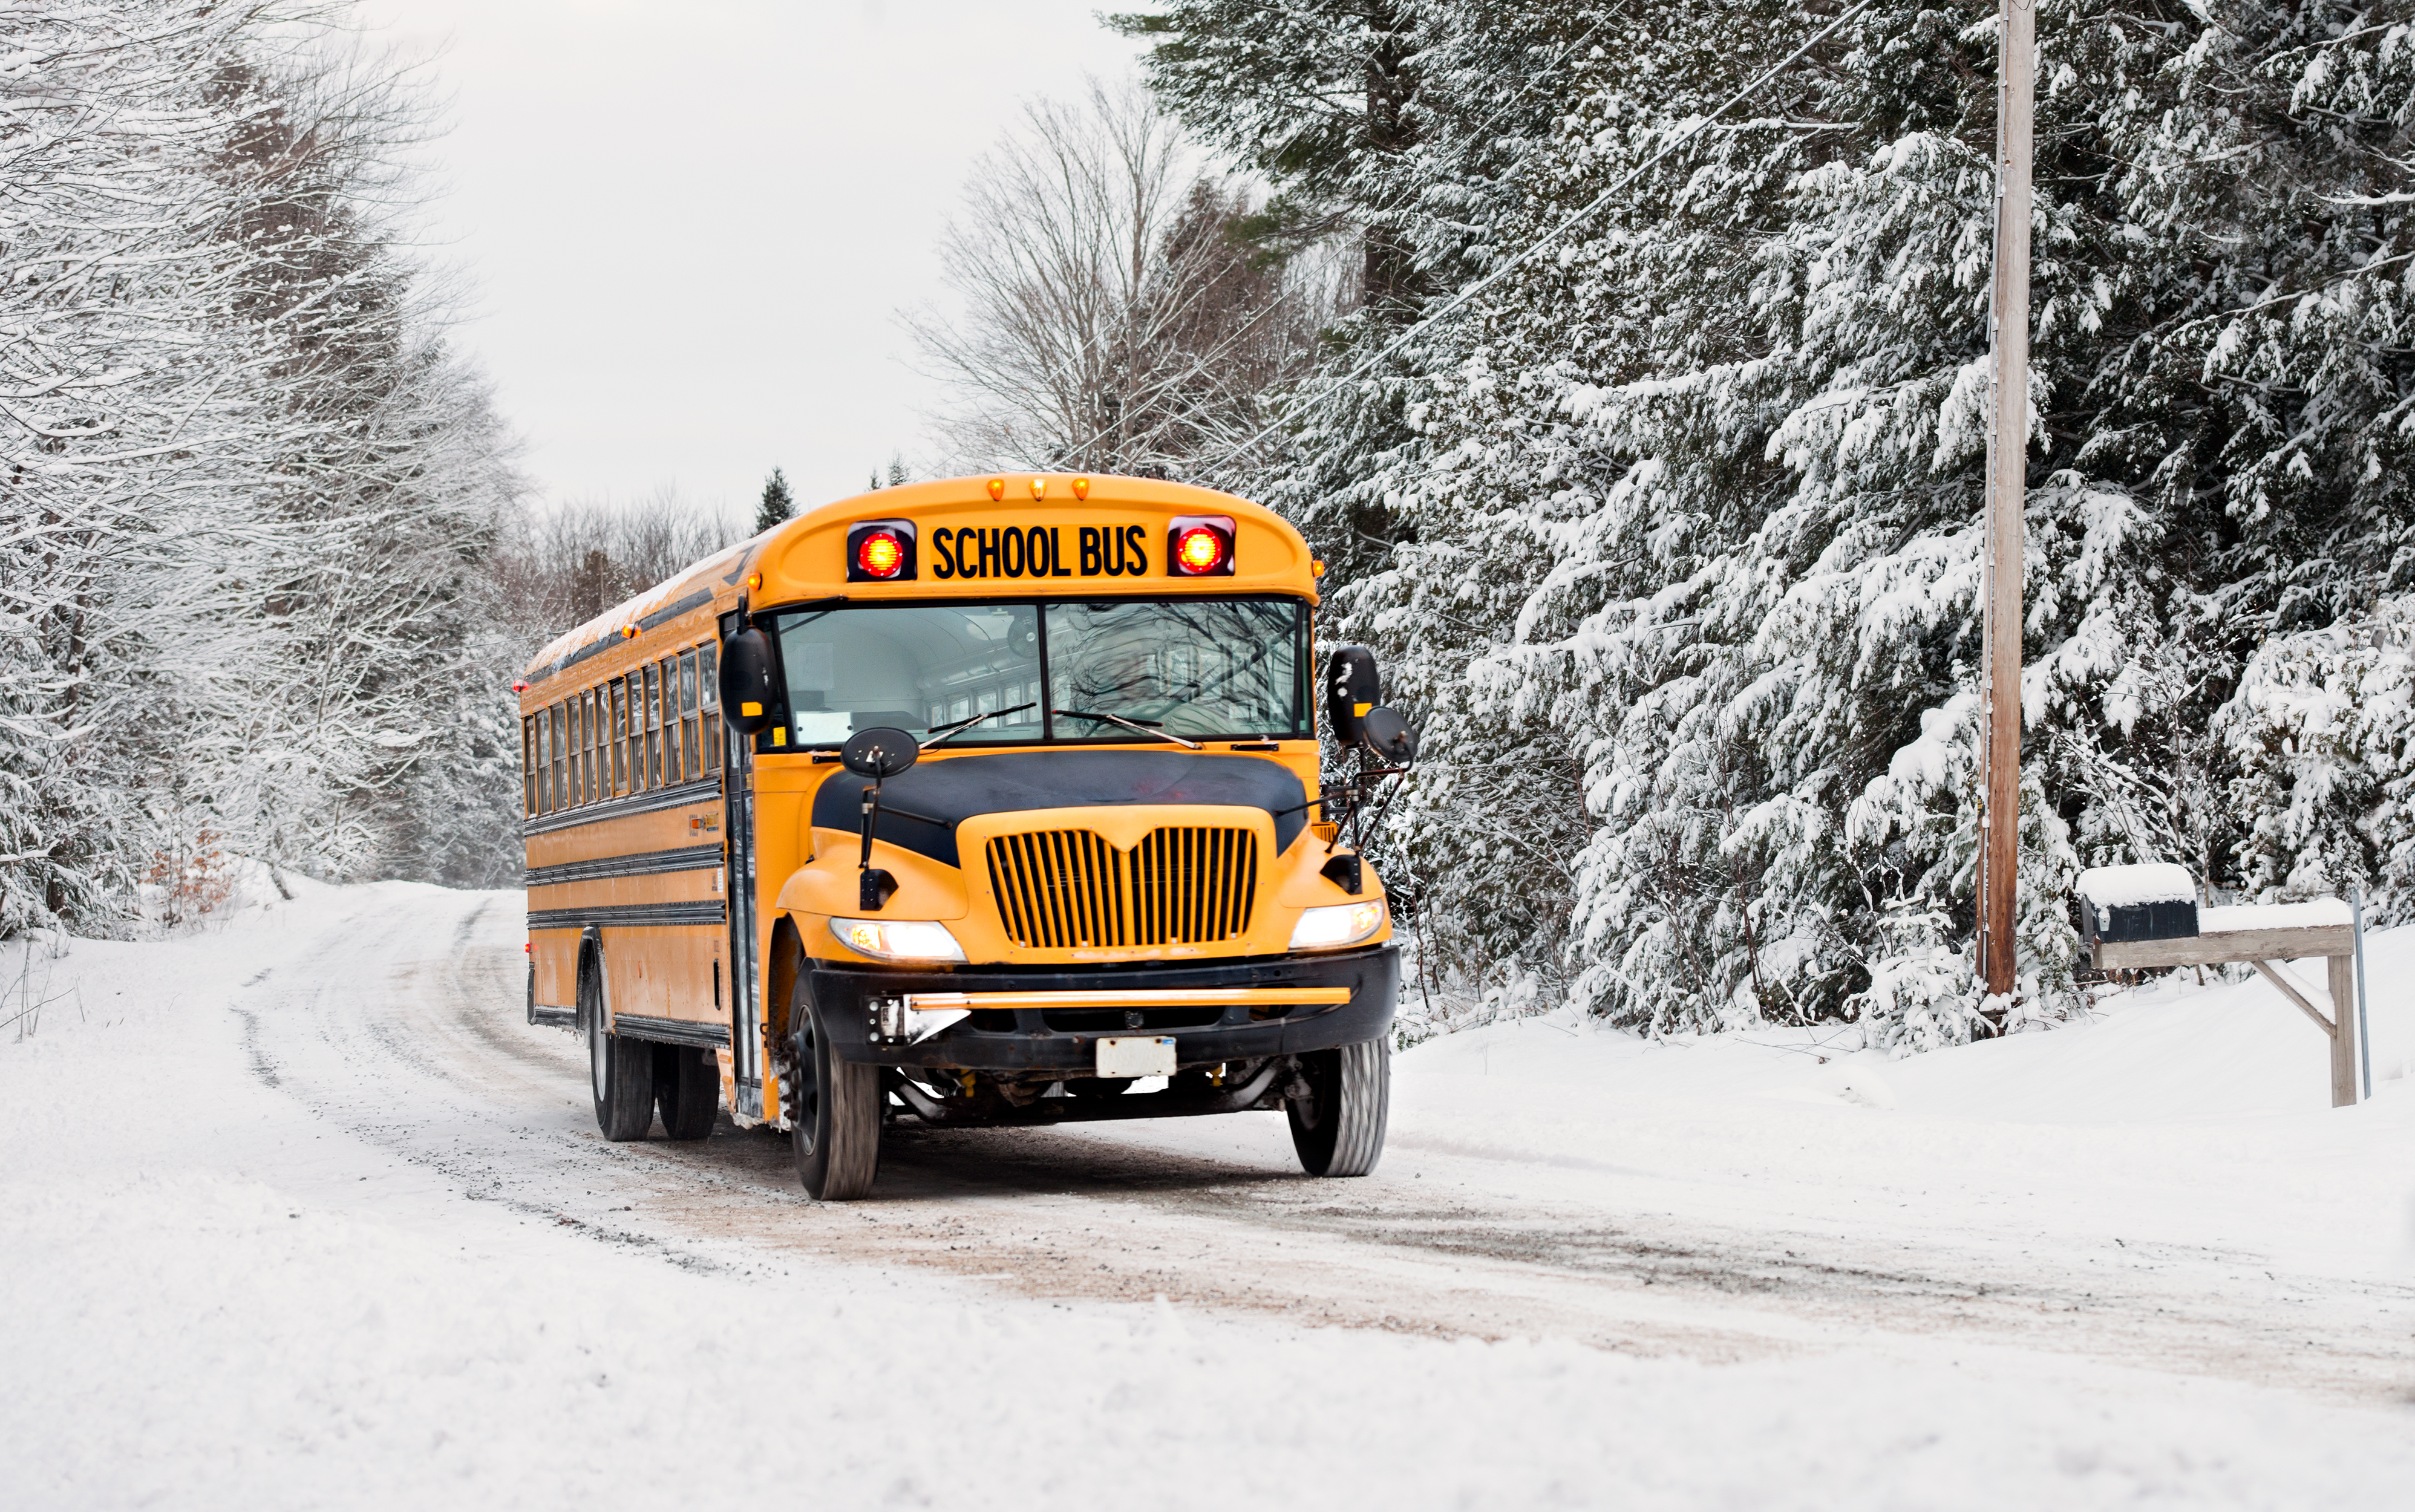 Prince George schools to stay open, buses to run during severe winter weather - Prince George Citizen